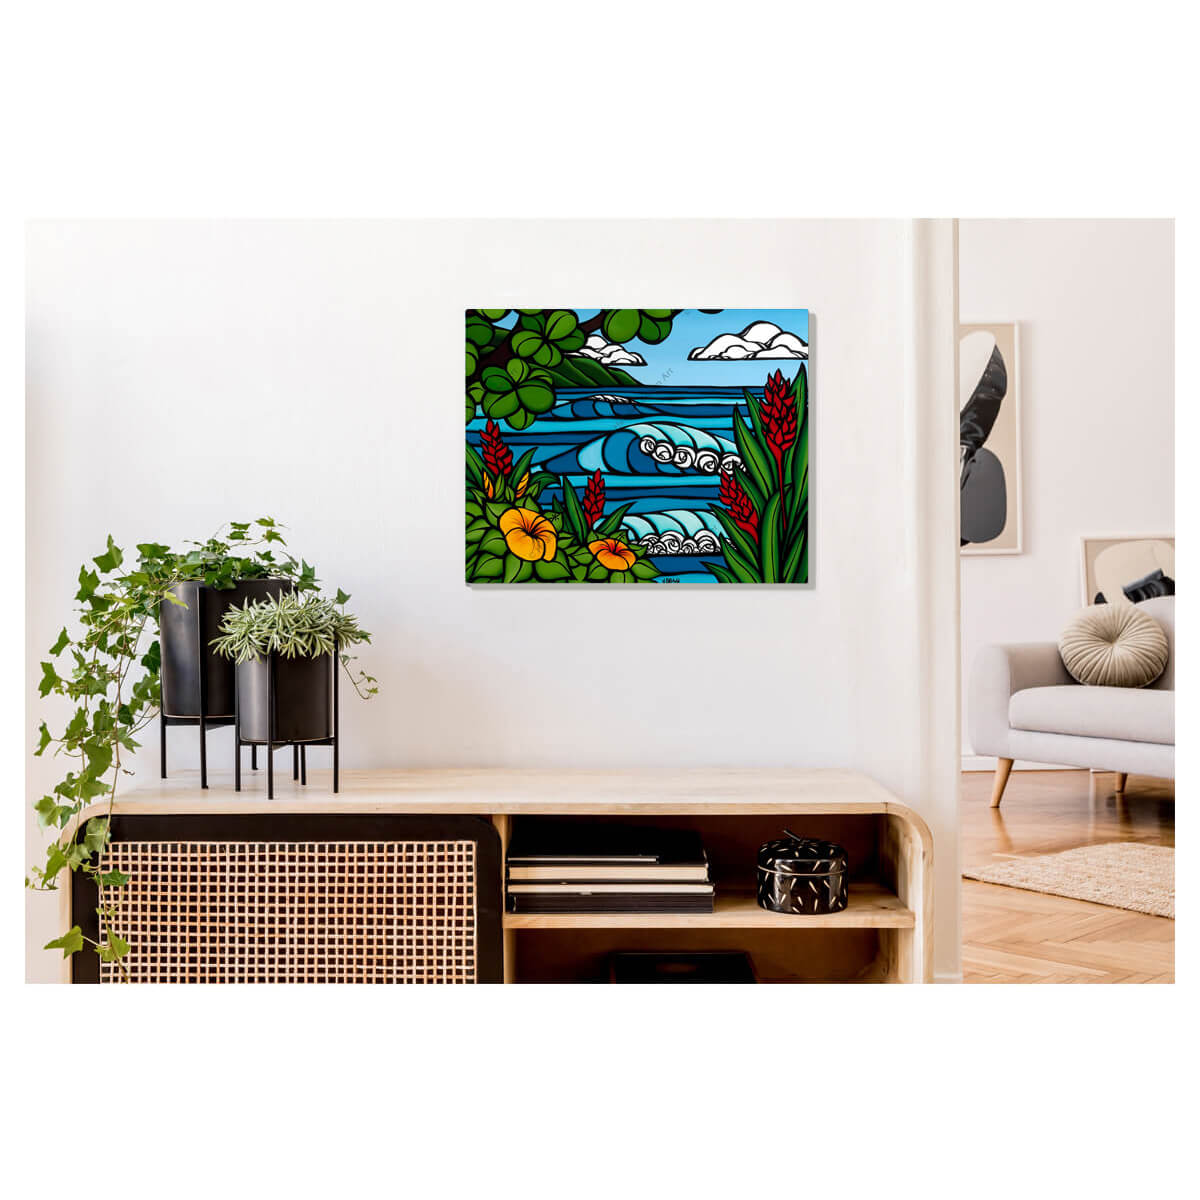 A metal art print featuring hibiscus flowers and bright ginger flowers by Hawaii surf artist Heather Brown